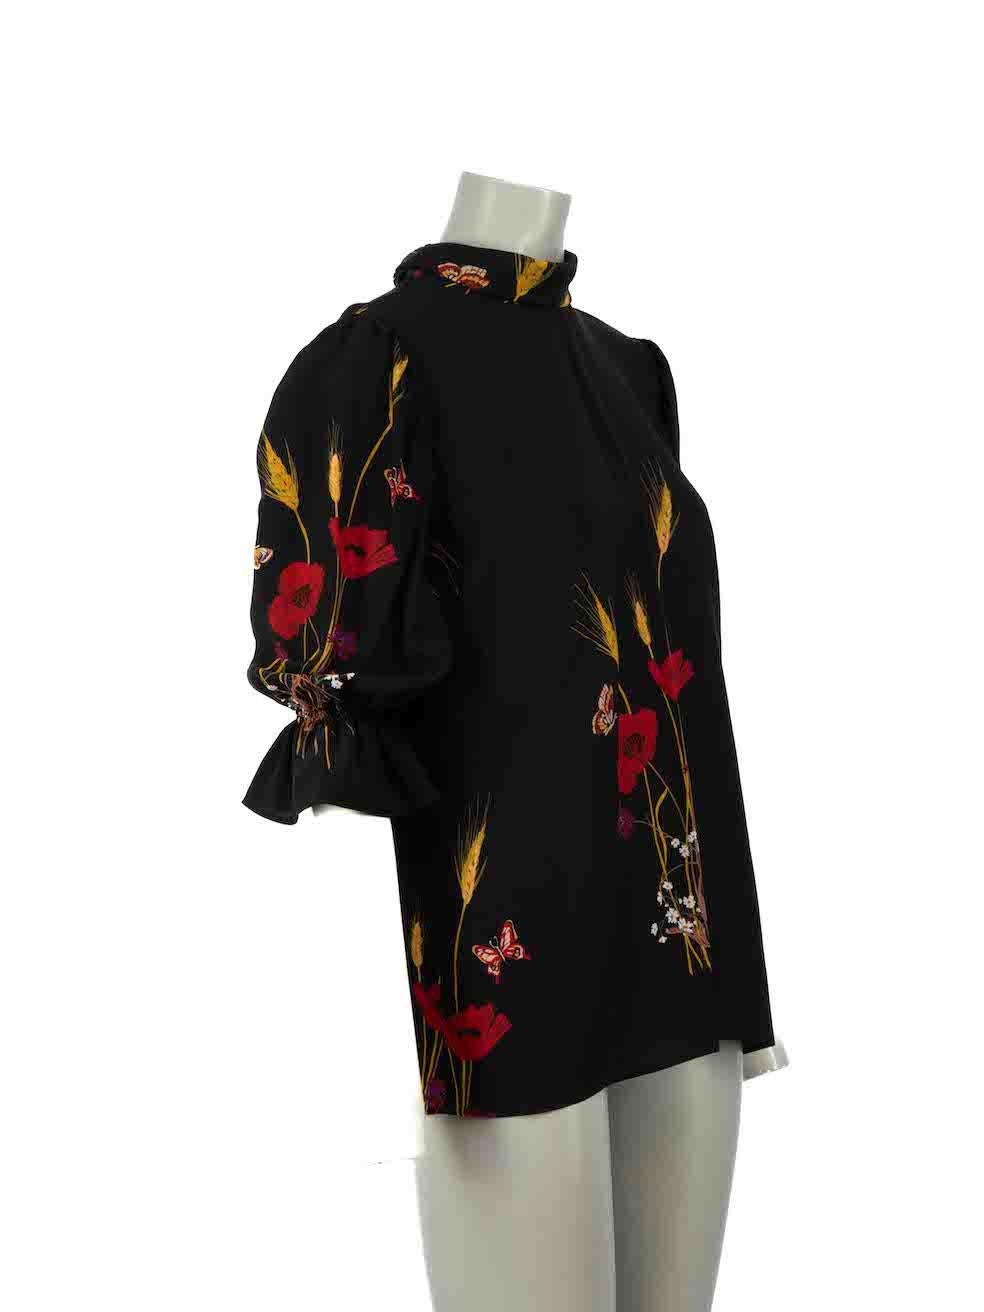 CONDITION is Very good. Minimal wear to top is evident. Minimal wear to the brand label at lining where one side has become detached on this used Valentino designer resale item.
 
Details
Black
Silk
Blouse
Floral pattern
Long sleeves
Tie neck
3/4